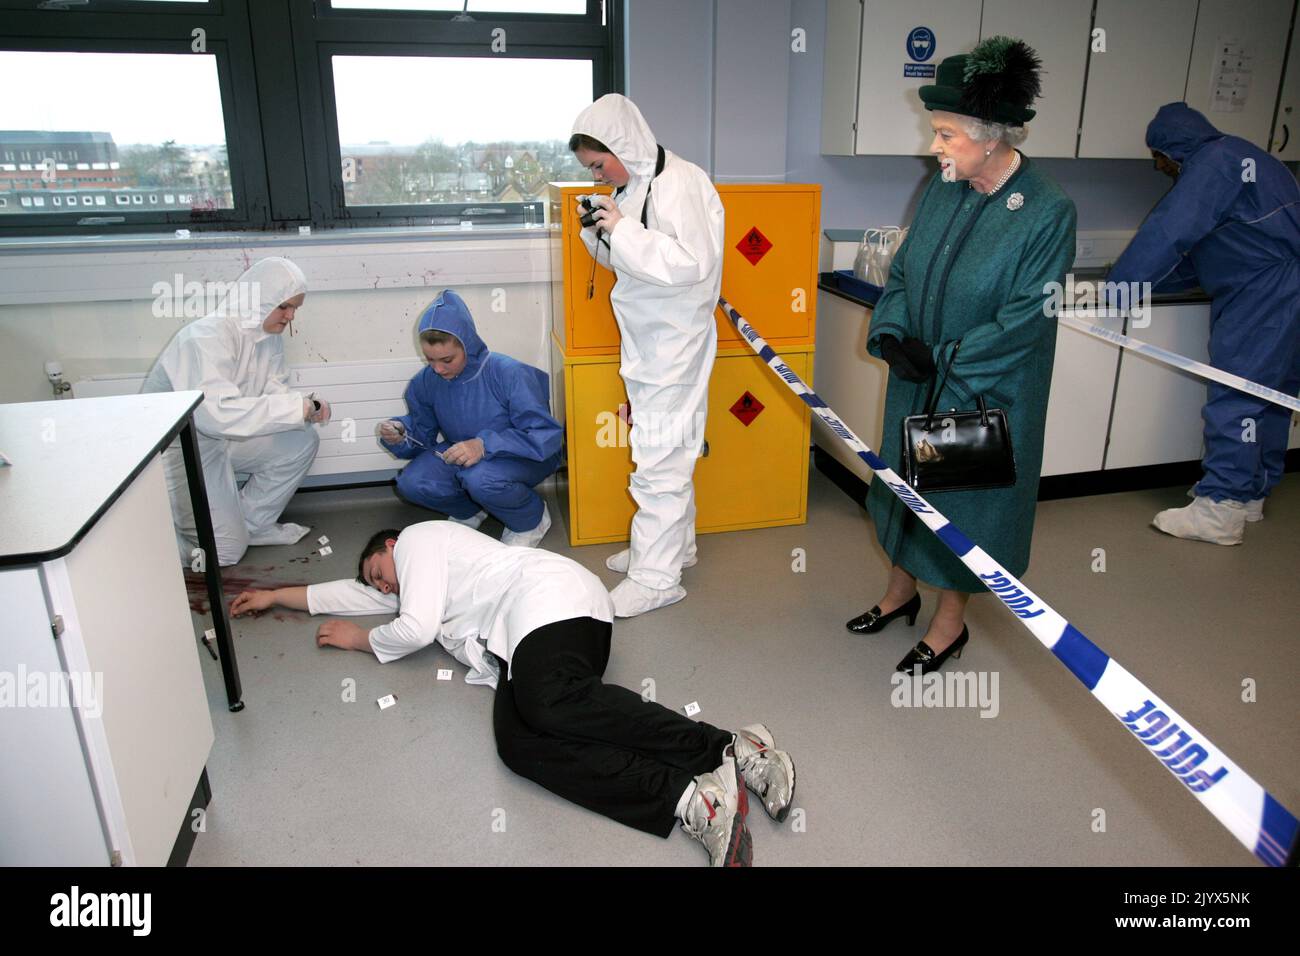 File photo dated 22/03/2007 of Queen Elizabeth II watching as forensic science students demonstrate the collecting of evidence at a simulated crime scene during her visit to the forensic science department at East Berkshire College, Windsor. The Queen died peacefully at Balmoral this afternoon, Buckingham Palace has announced. Issue date: Thursday September 8, 2022. Stock Photo